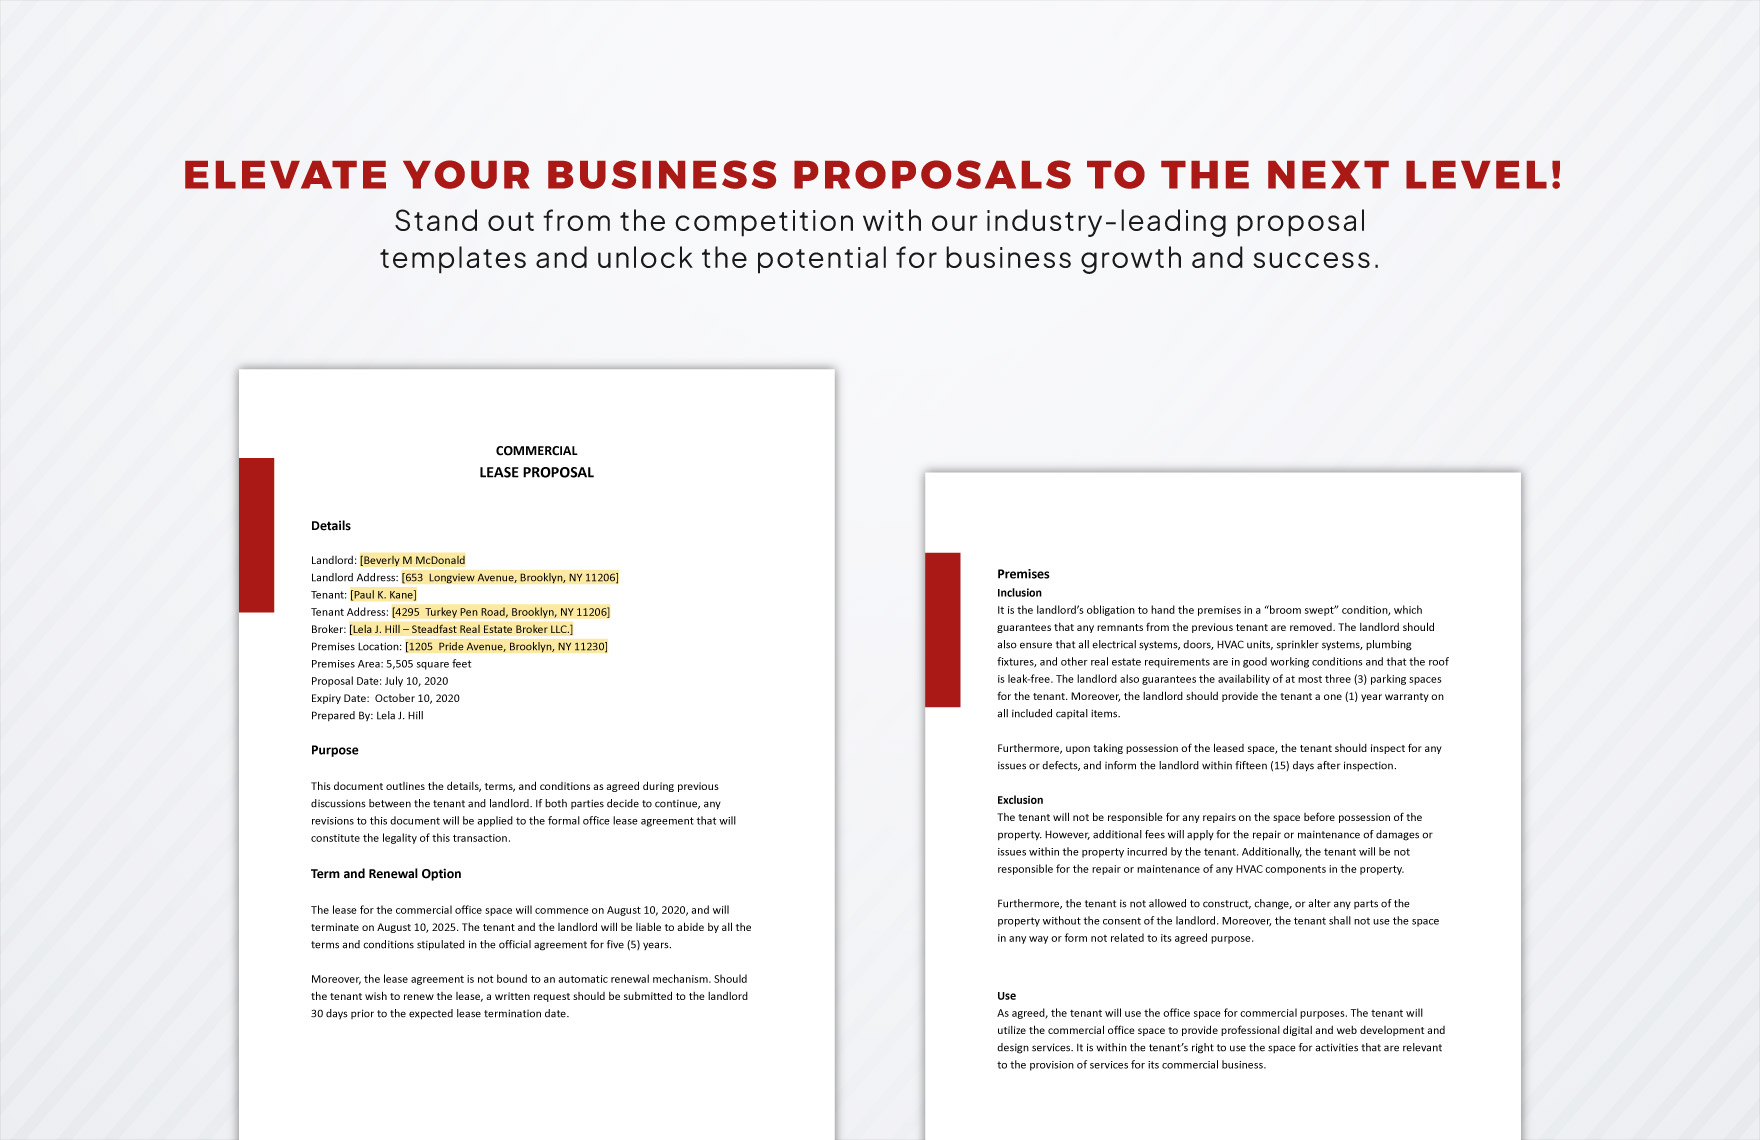 Office Lease Proposal Template